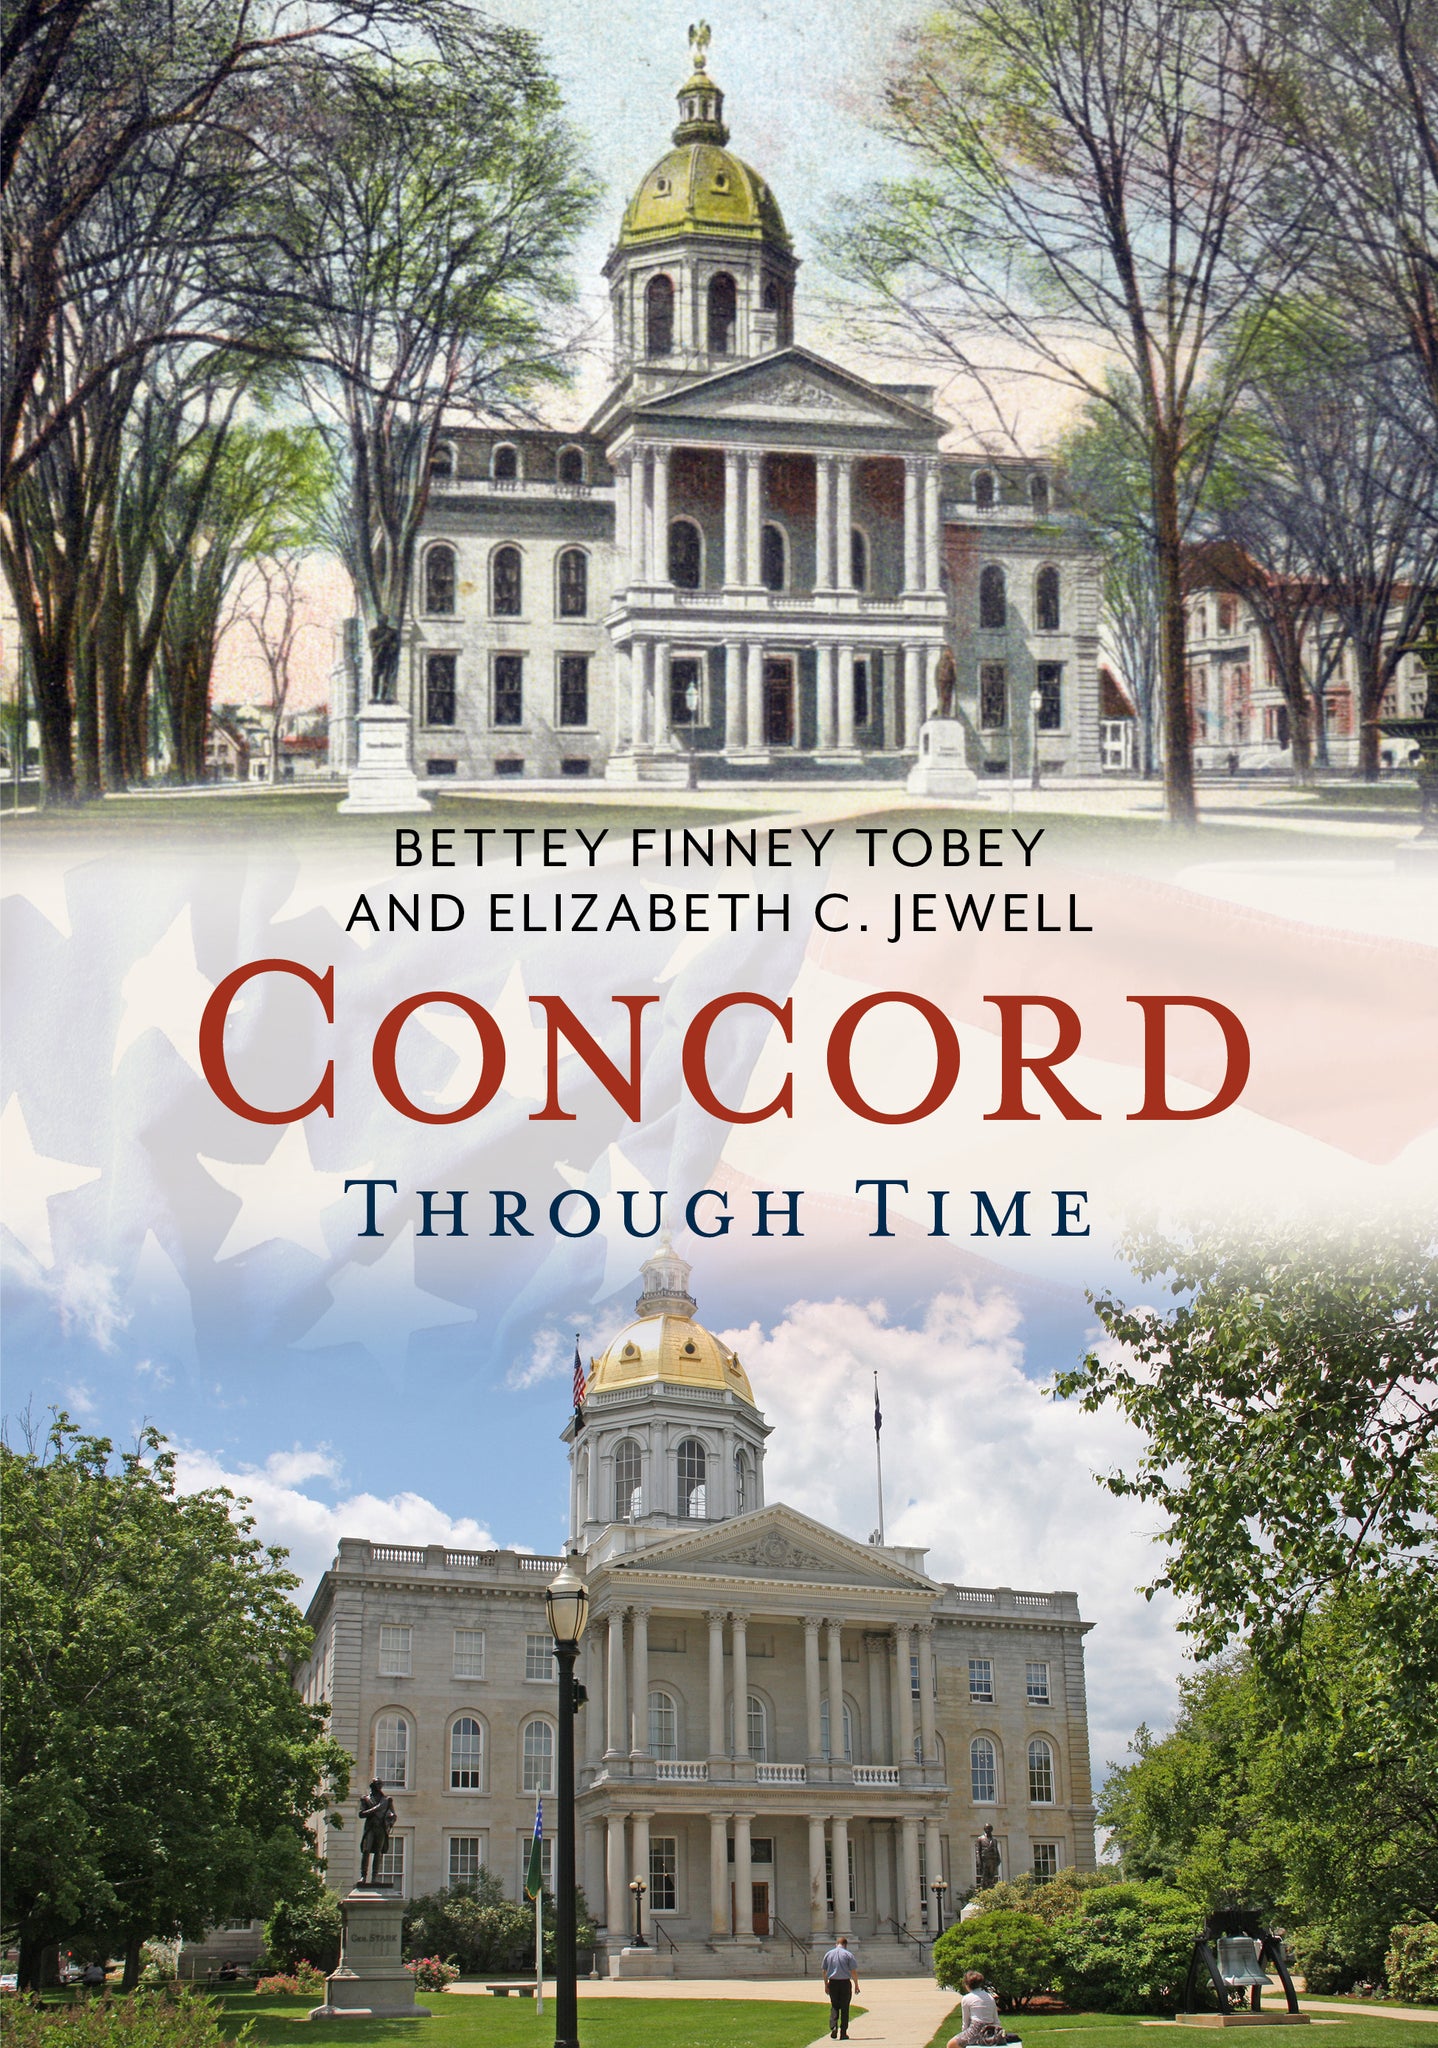 Concord Through Time - published by America Through Time